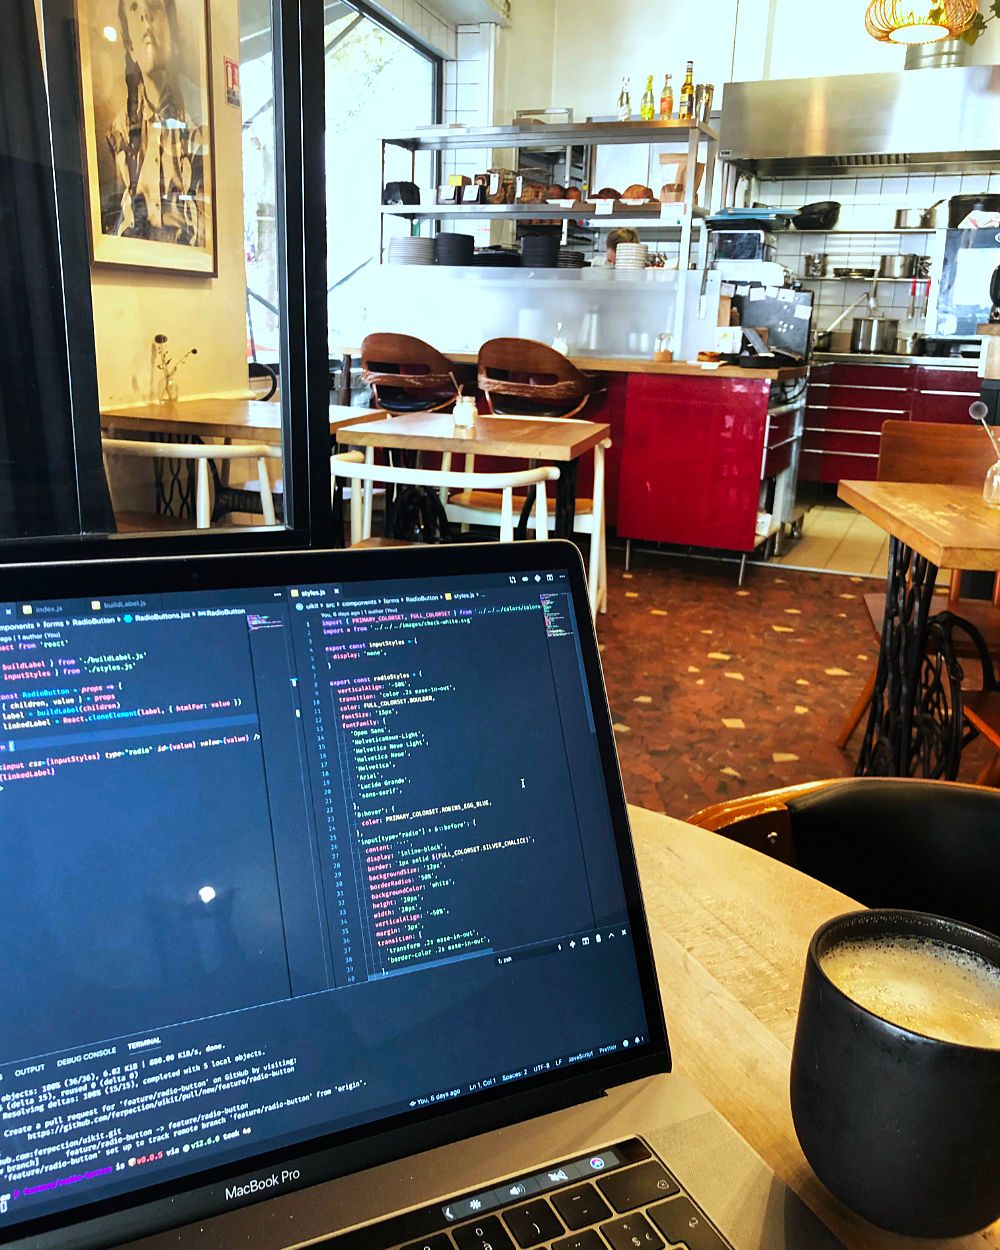 Coding in peace with a full belly at Le Kitchen Café